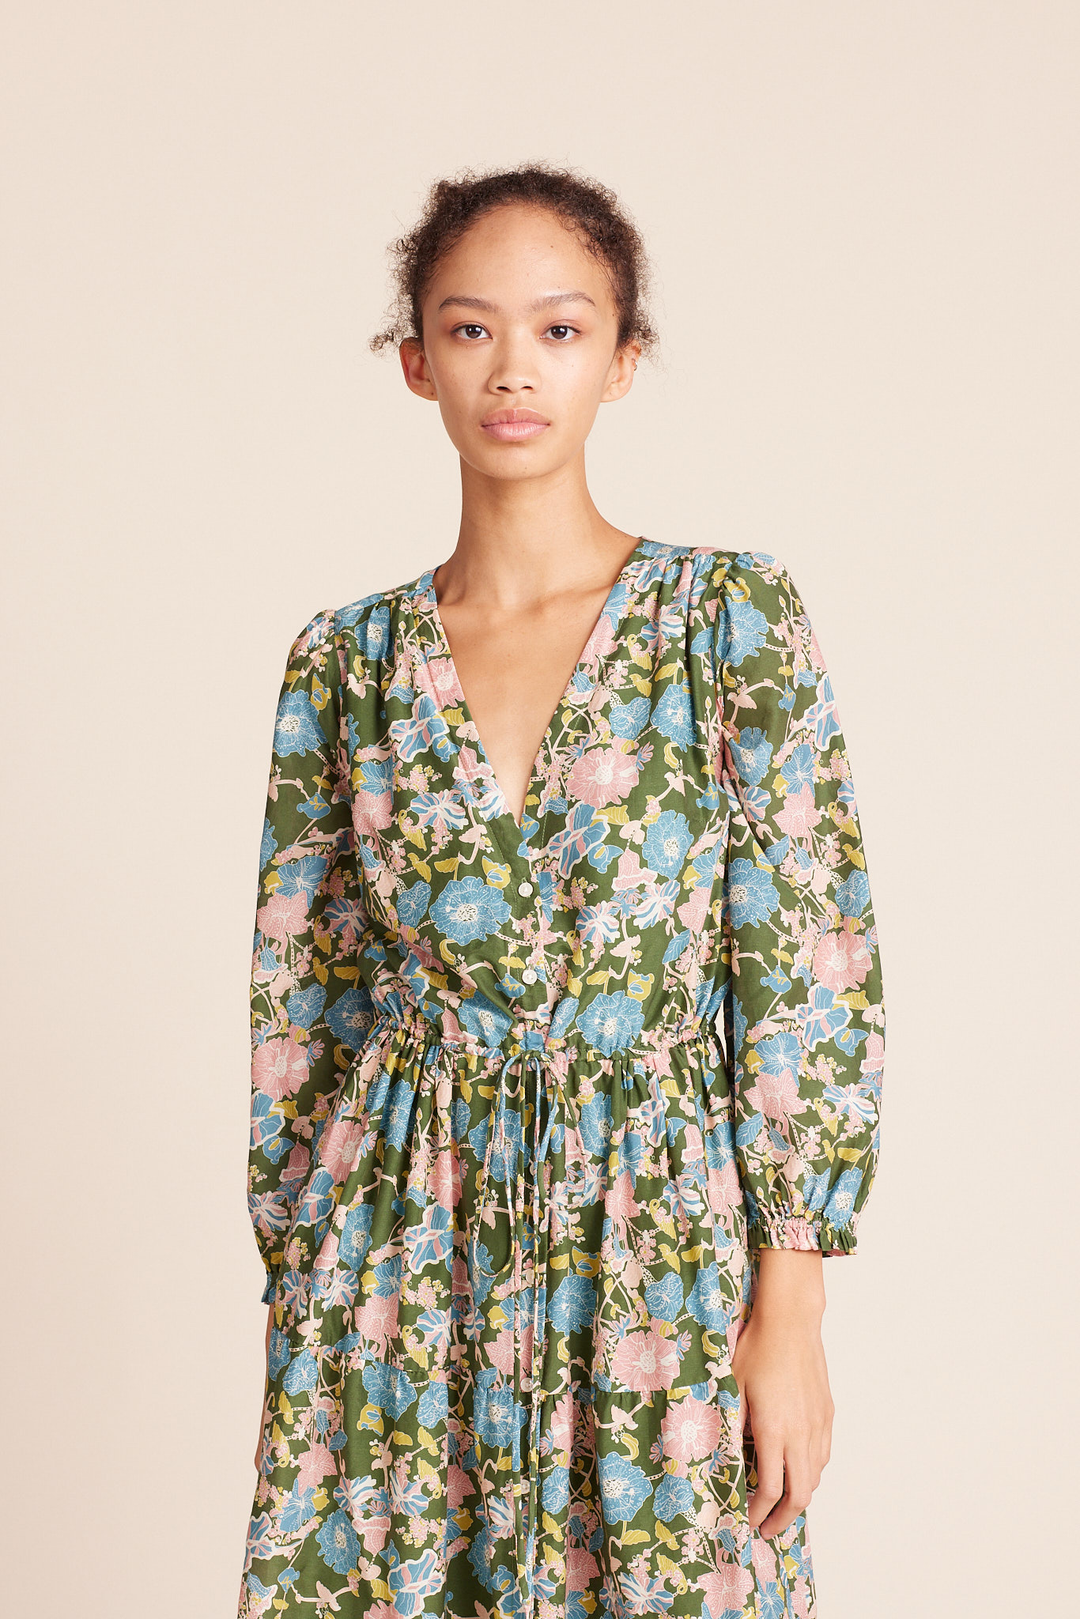 Trovata - Ainsley "B" Dress in Spring Tendril